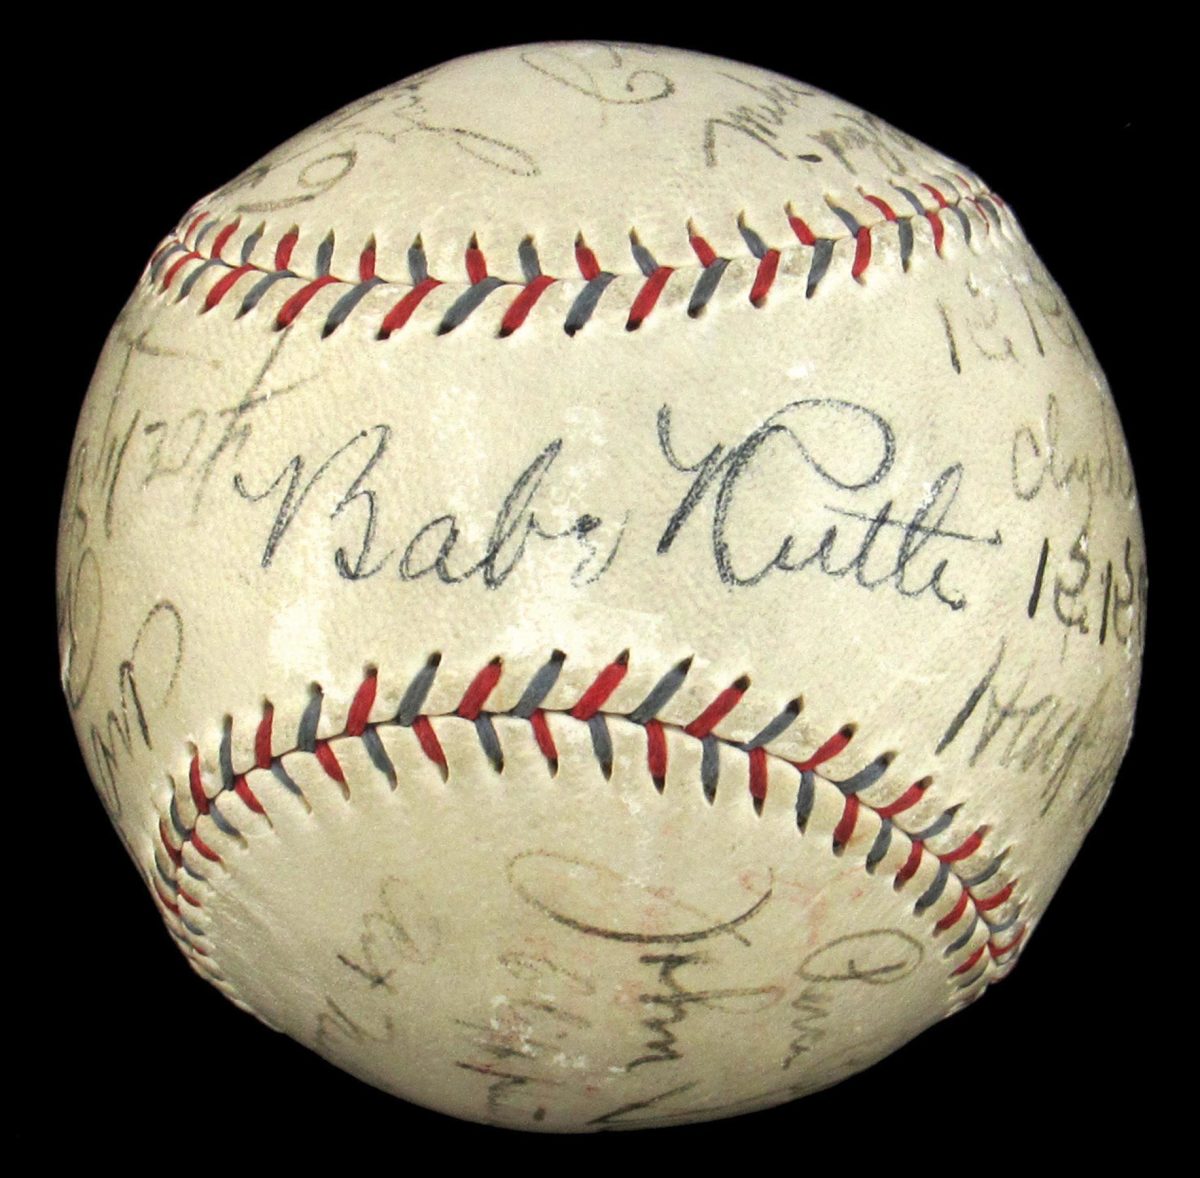 Baseball signed by Babe Ruth and the 1929 Chicago Cubs.